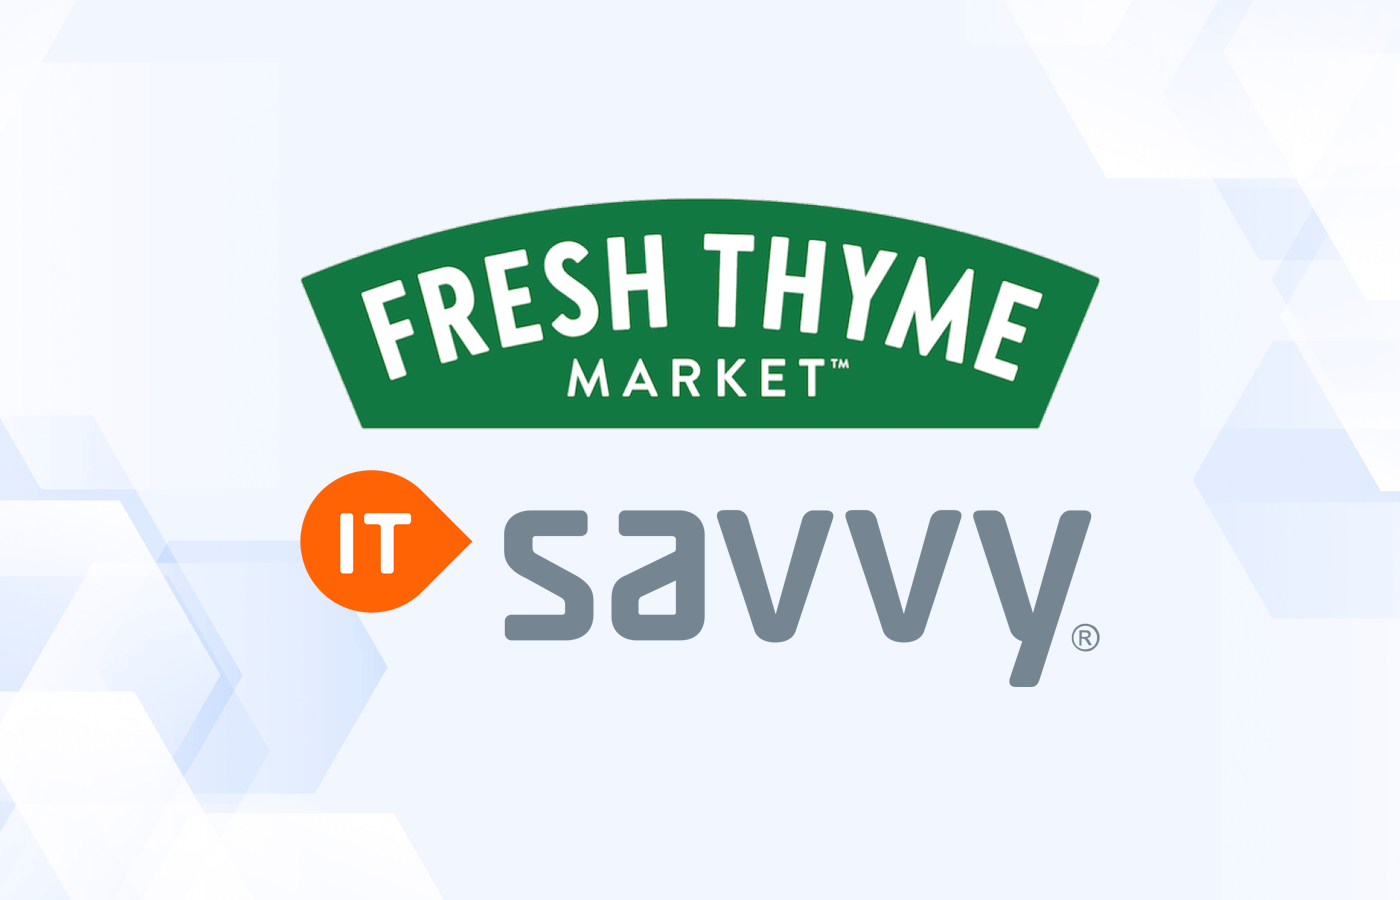 ITsavvy Innovating the Retail Experience at Fresh Thyme Market